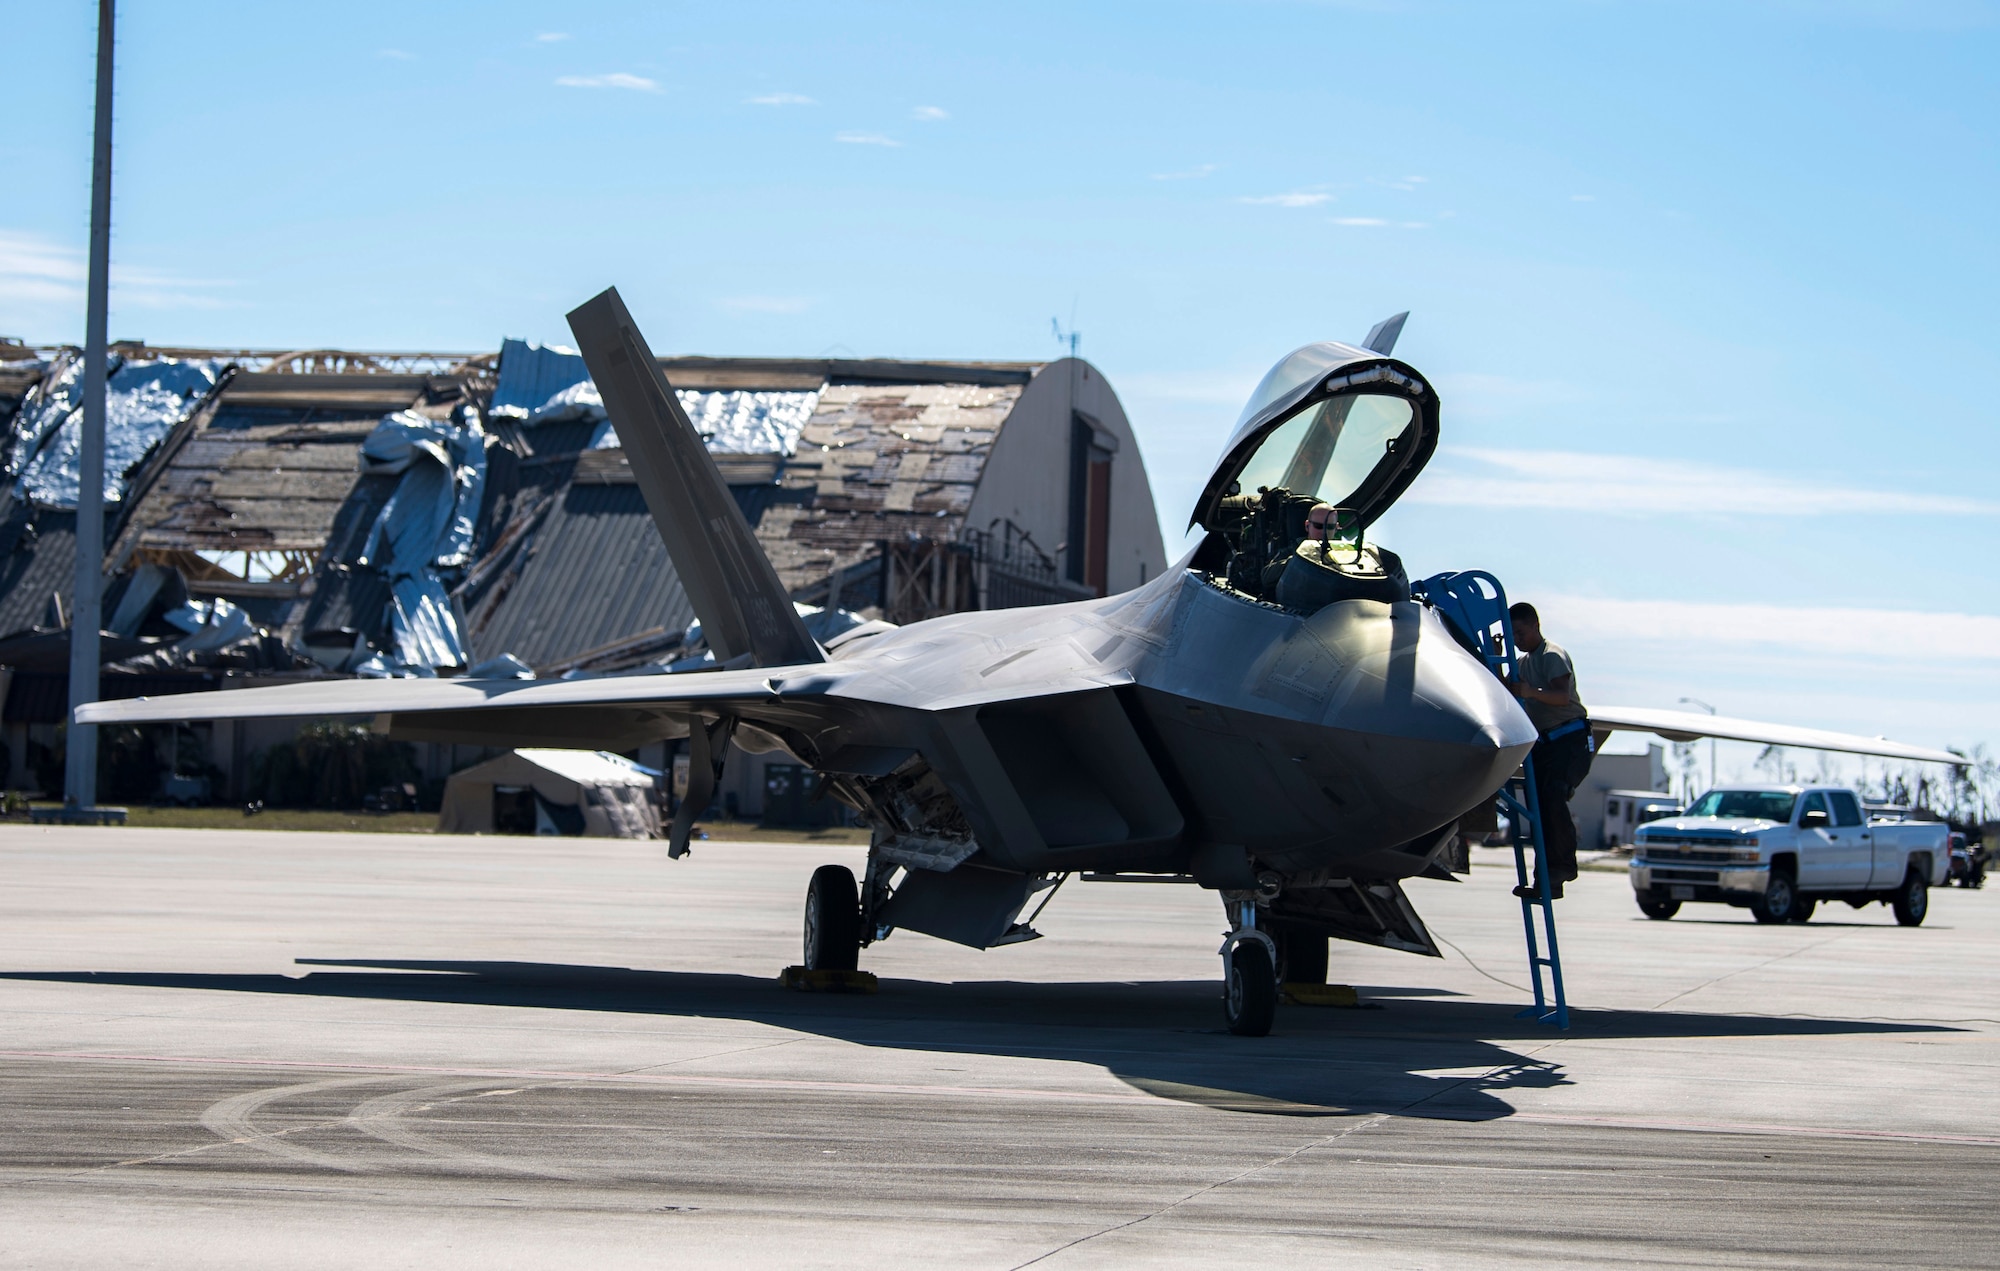 A pilot from the 27th fighter Squadron, Langley, Virginia, prepares to fly an F-22 Raptor fighter aircraft from Tyndall Air Force Base, Florida, following Hurricane Michael, October 24, 2018. Support personnel from Tyndall and other bases are working to repair base infrastructure and build bare-bones facilities after Hurricane Michael.(U.S. Air Force photo by Airman 1st Class Kelly Walker)